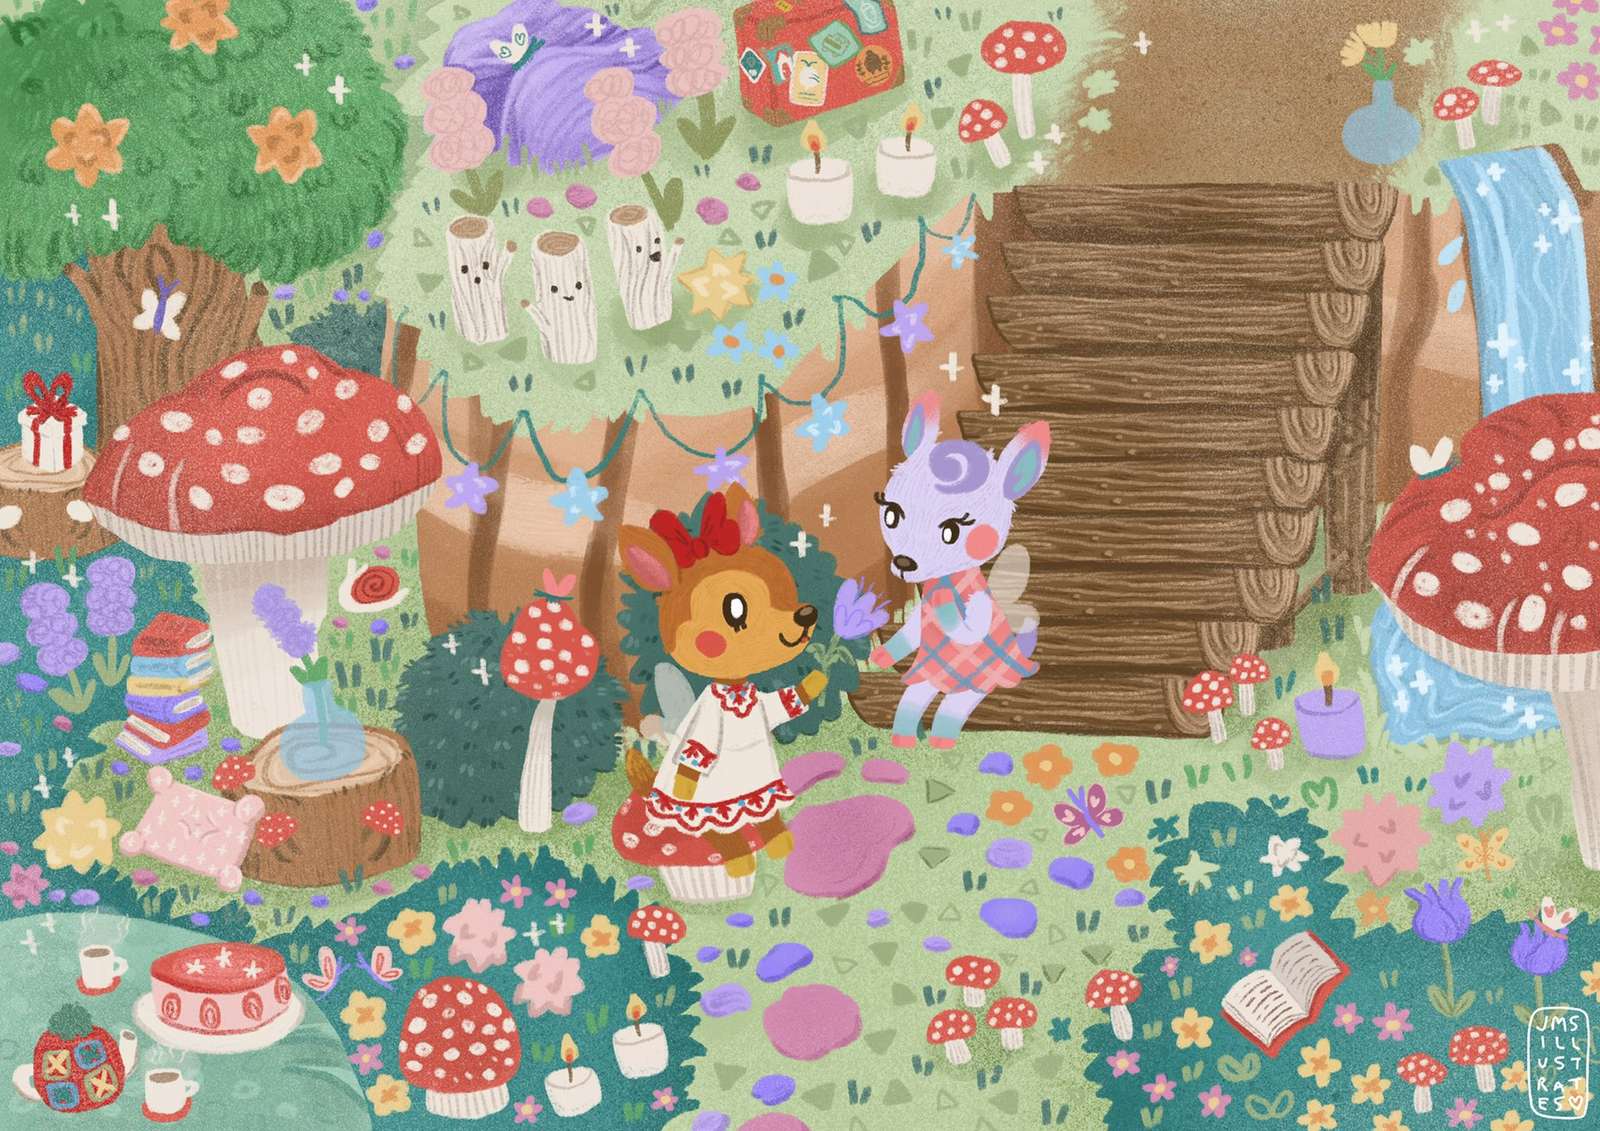 Fauna & Diana Art (Animal Crossing New Horizon) puzzle online from photo